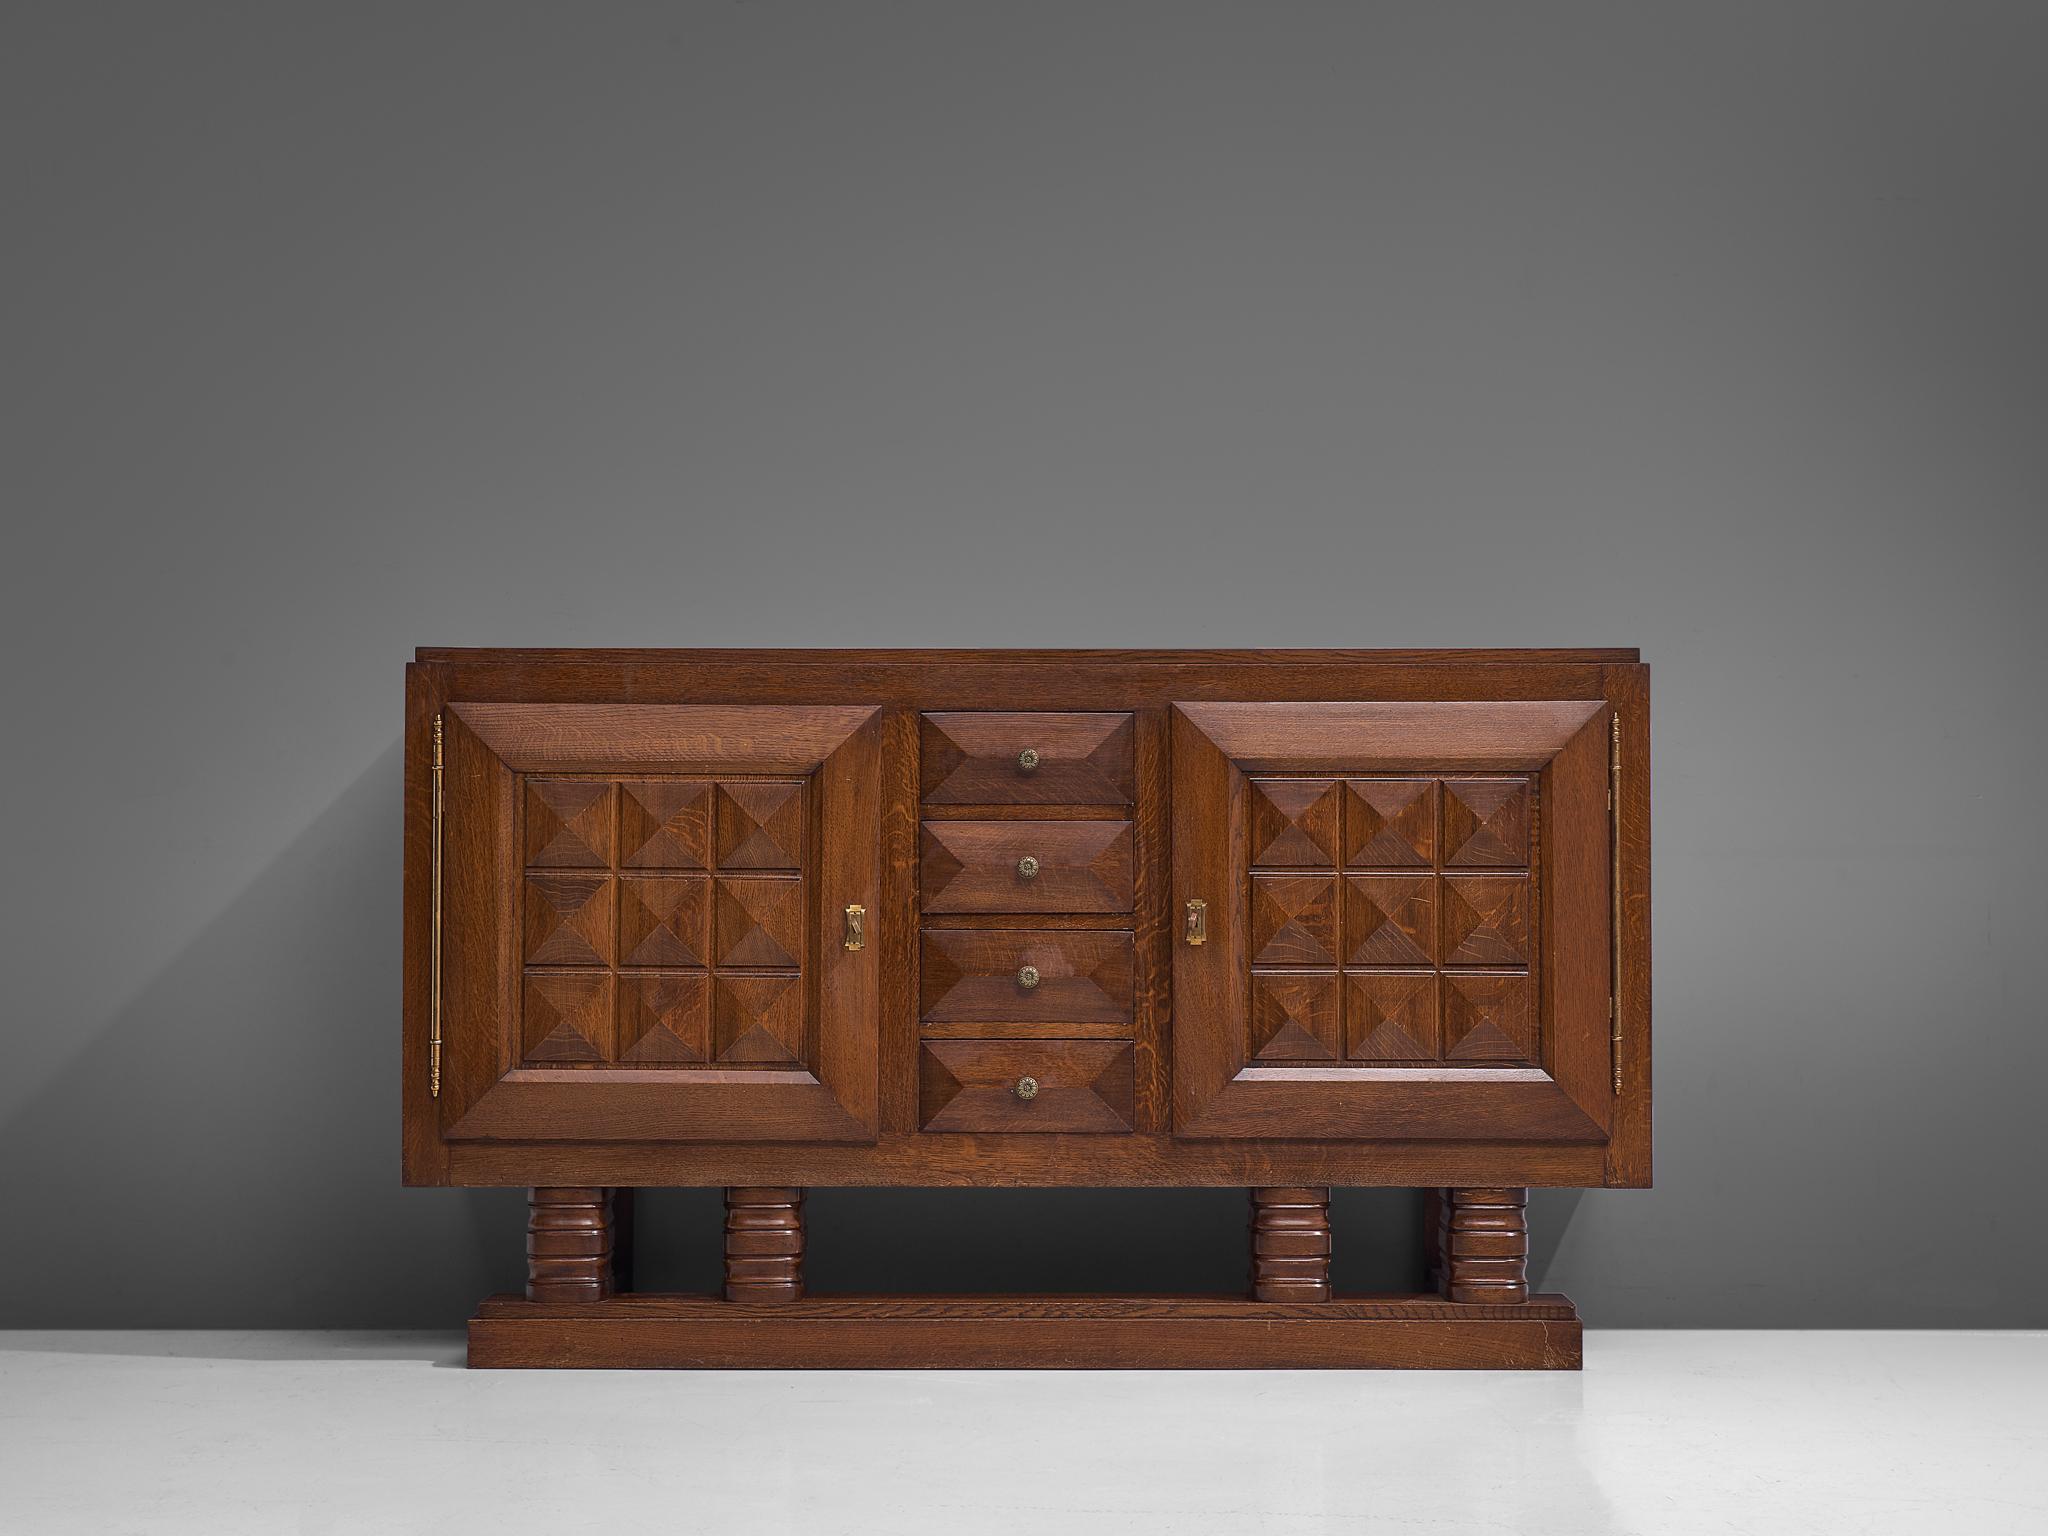 Gaston Poisson, credenza, stained oak, France, 1930s. 

Sturdy sideboard in oak with graphical door panels and drawers. The sideboard is equipped with several shelves and four drawers which provide plenty of storage space. The door panels and base